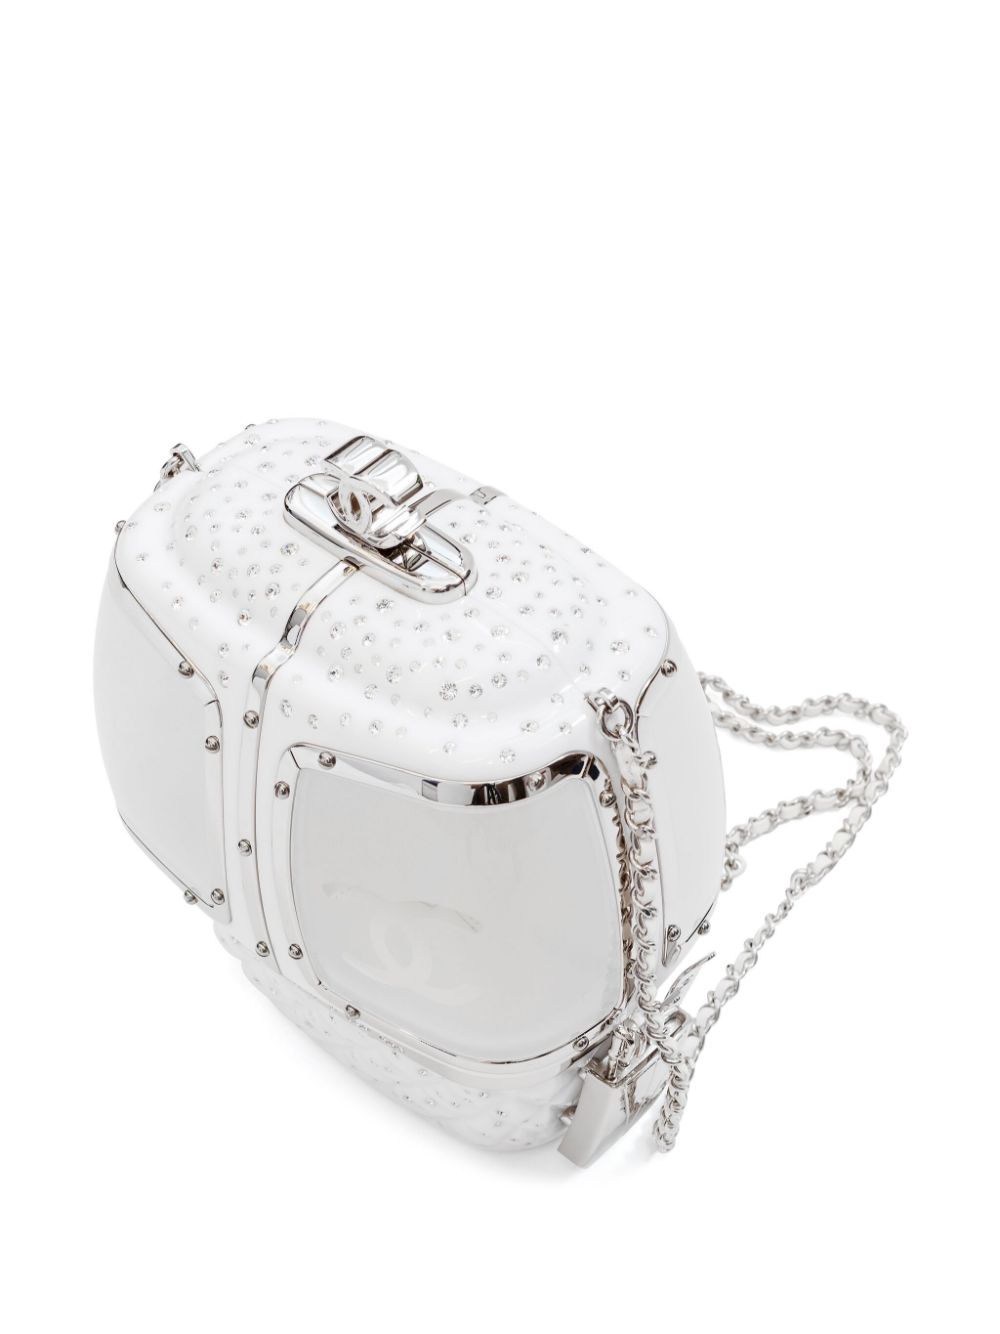 Pre-owned Chanel 2019 Gondola Lift Clutch Bag In White